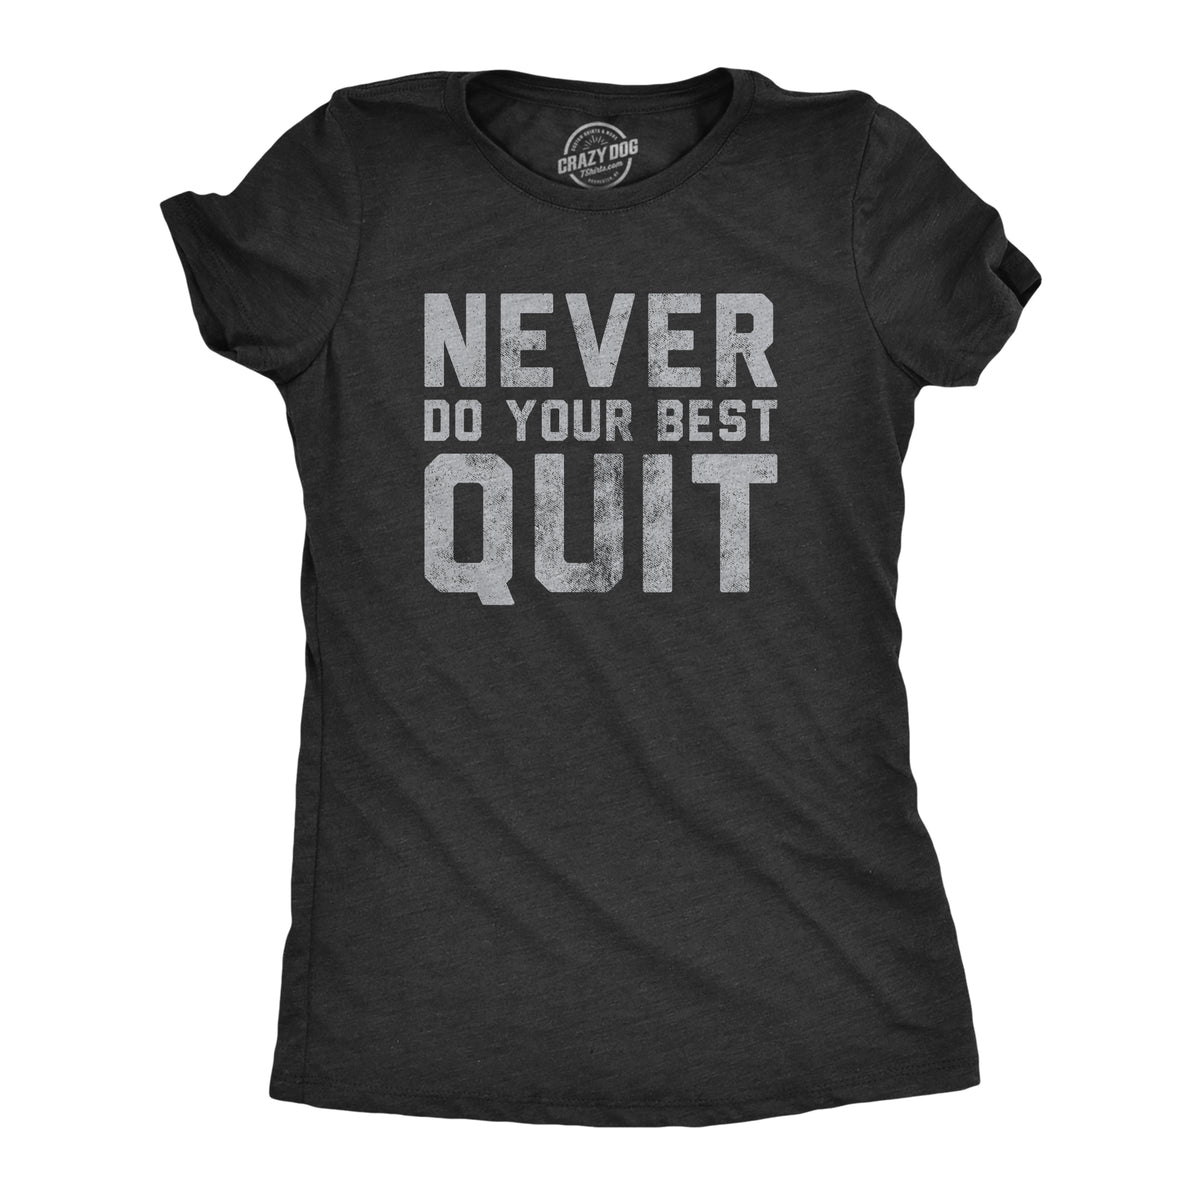 Funny Heather Black - QUIT Never Do Your Best Quit Womens T Shirt Nerdy Sarcastic Tee